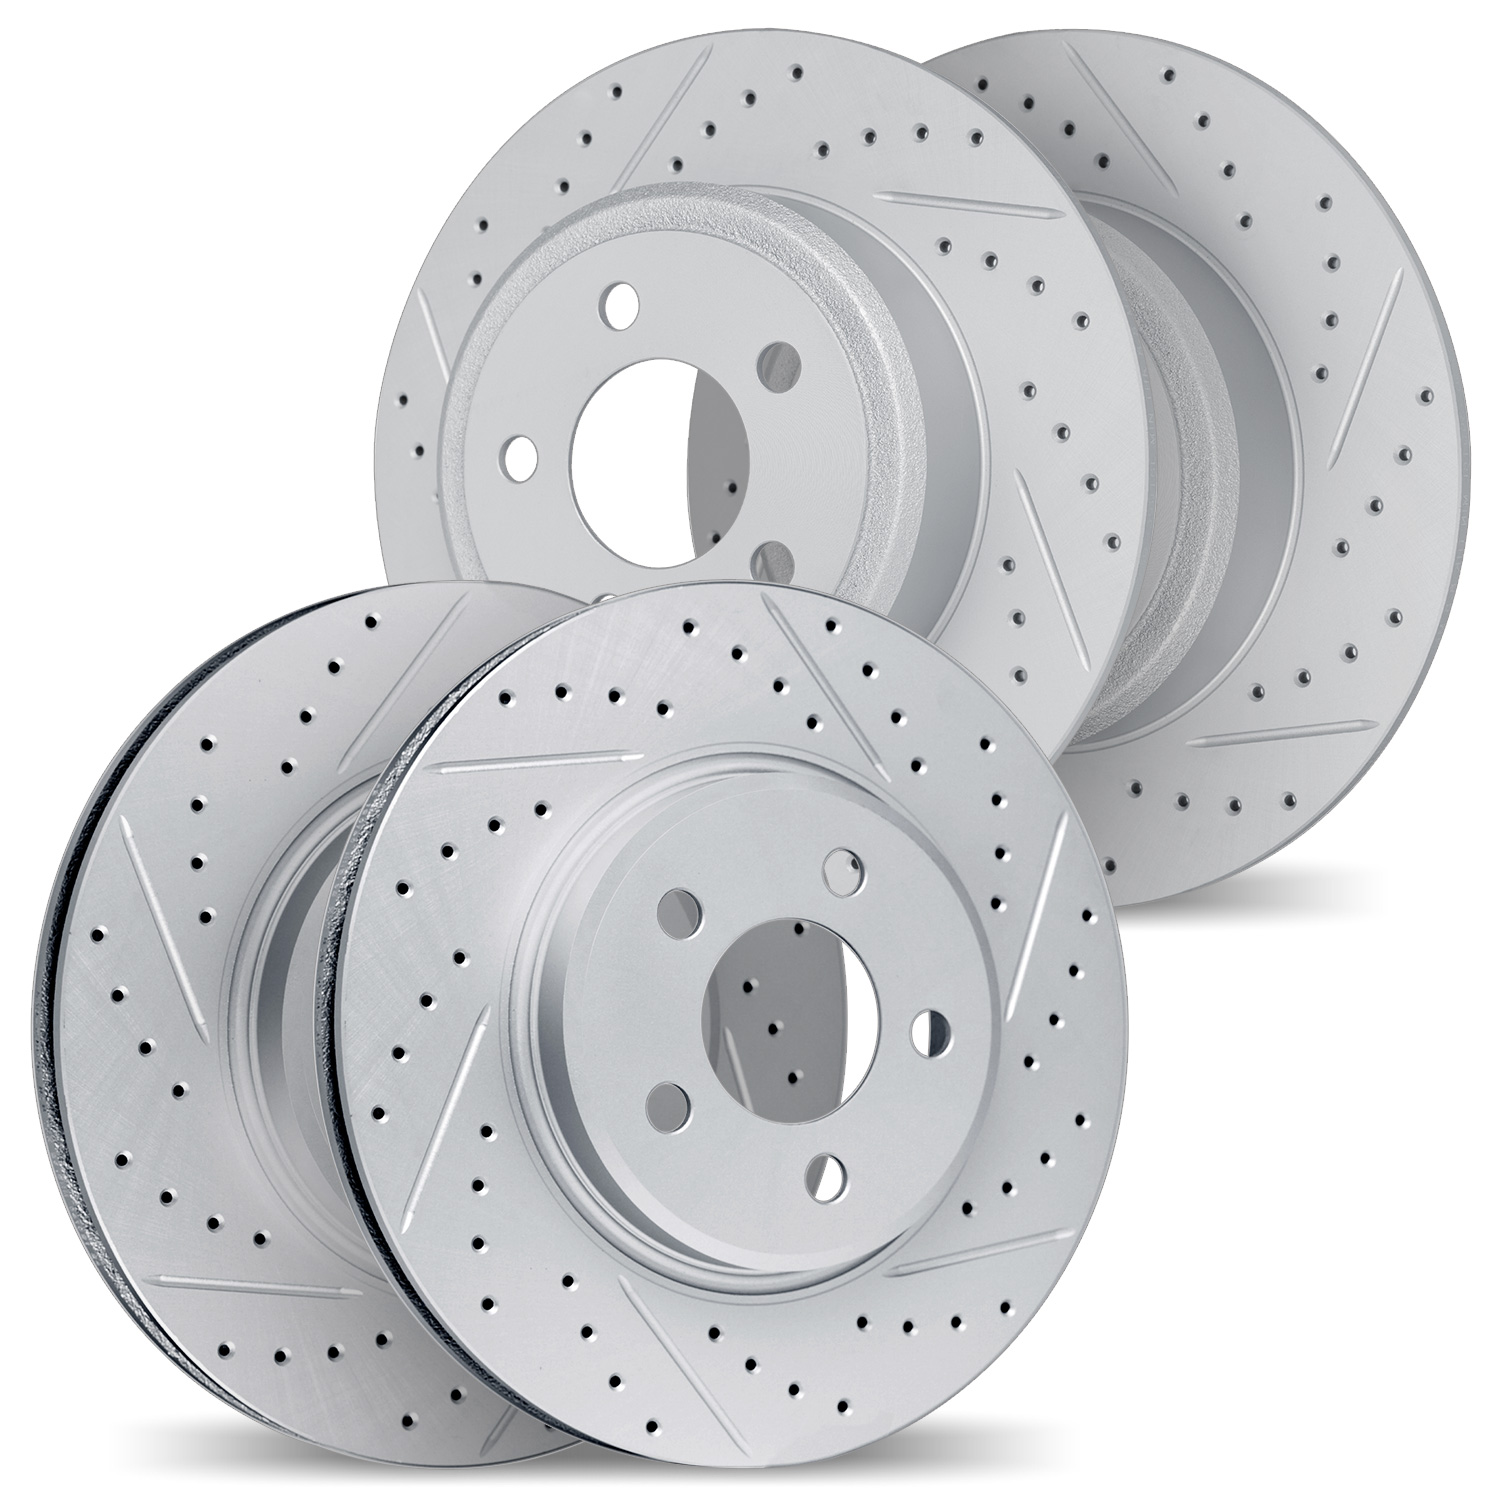 2004-65000 Geoperformance Drilled/Slotted Brake Rotors, 2003-2011 GM, Position: Front and Rear